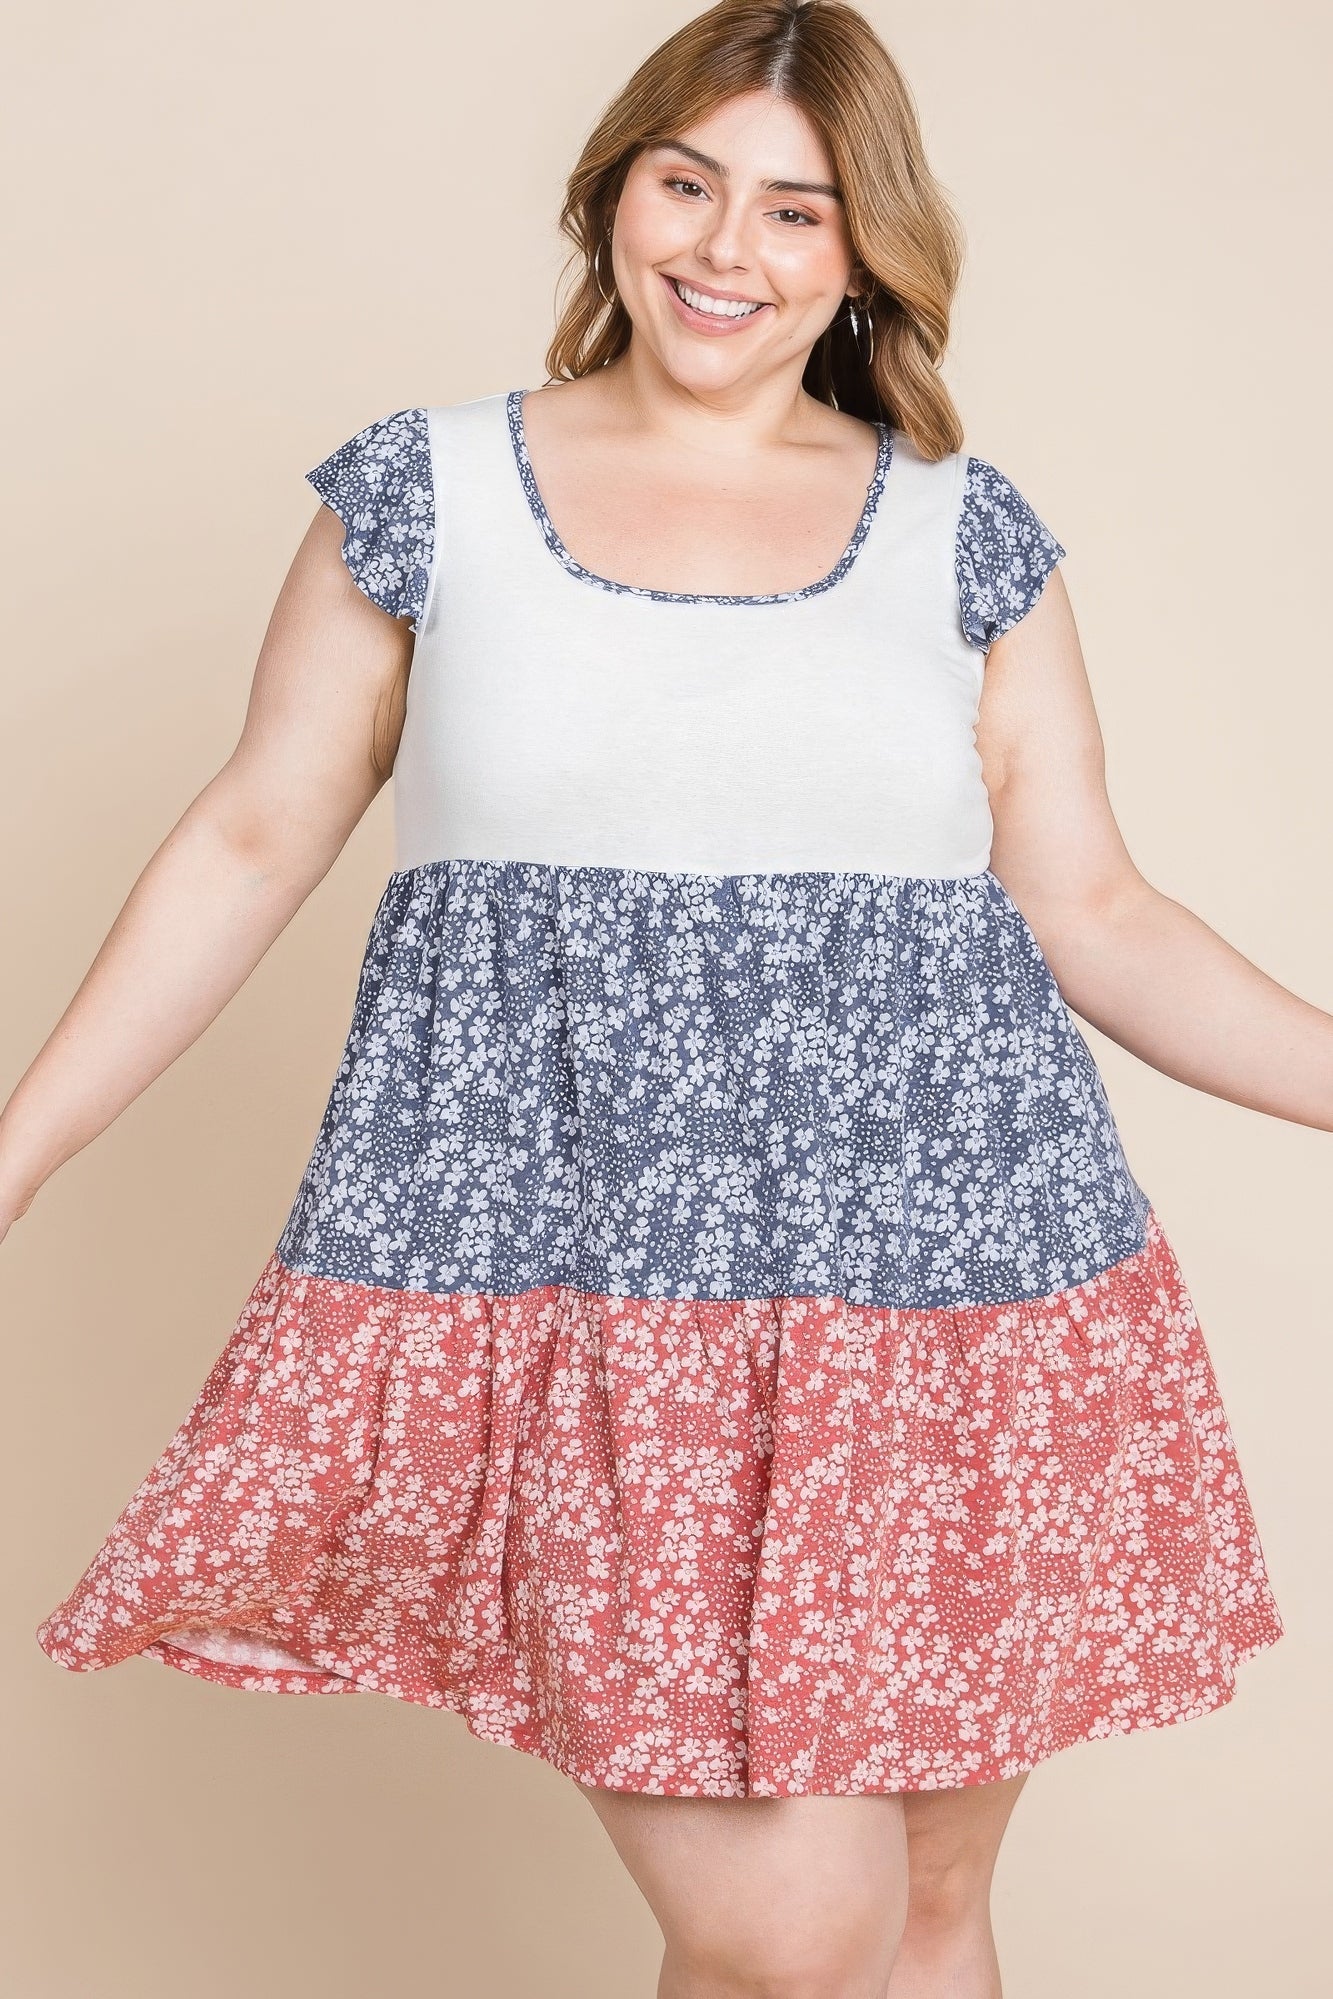 Plus Size Floral Color Block Contrast Tiered Babydoll Dress - Tigbul's Variety Fashion Shop